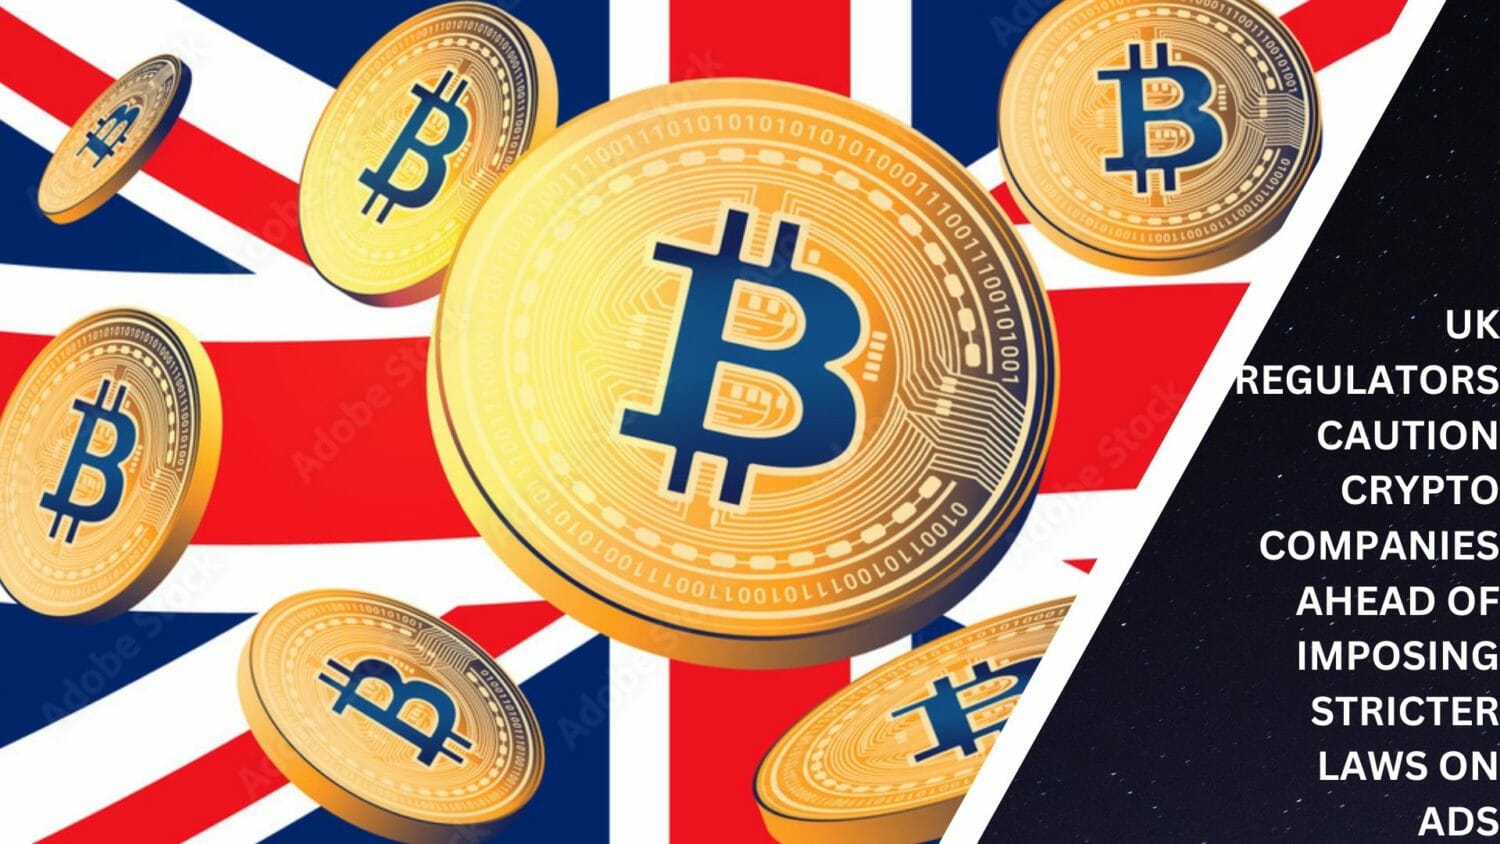 Uk Regulators Caution Crypto Companies Ahead Of Imposing Stricter Laws On Ads